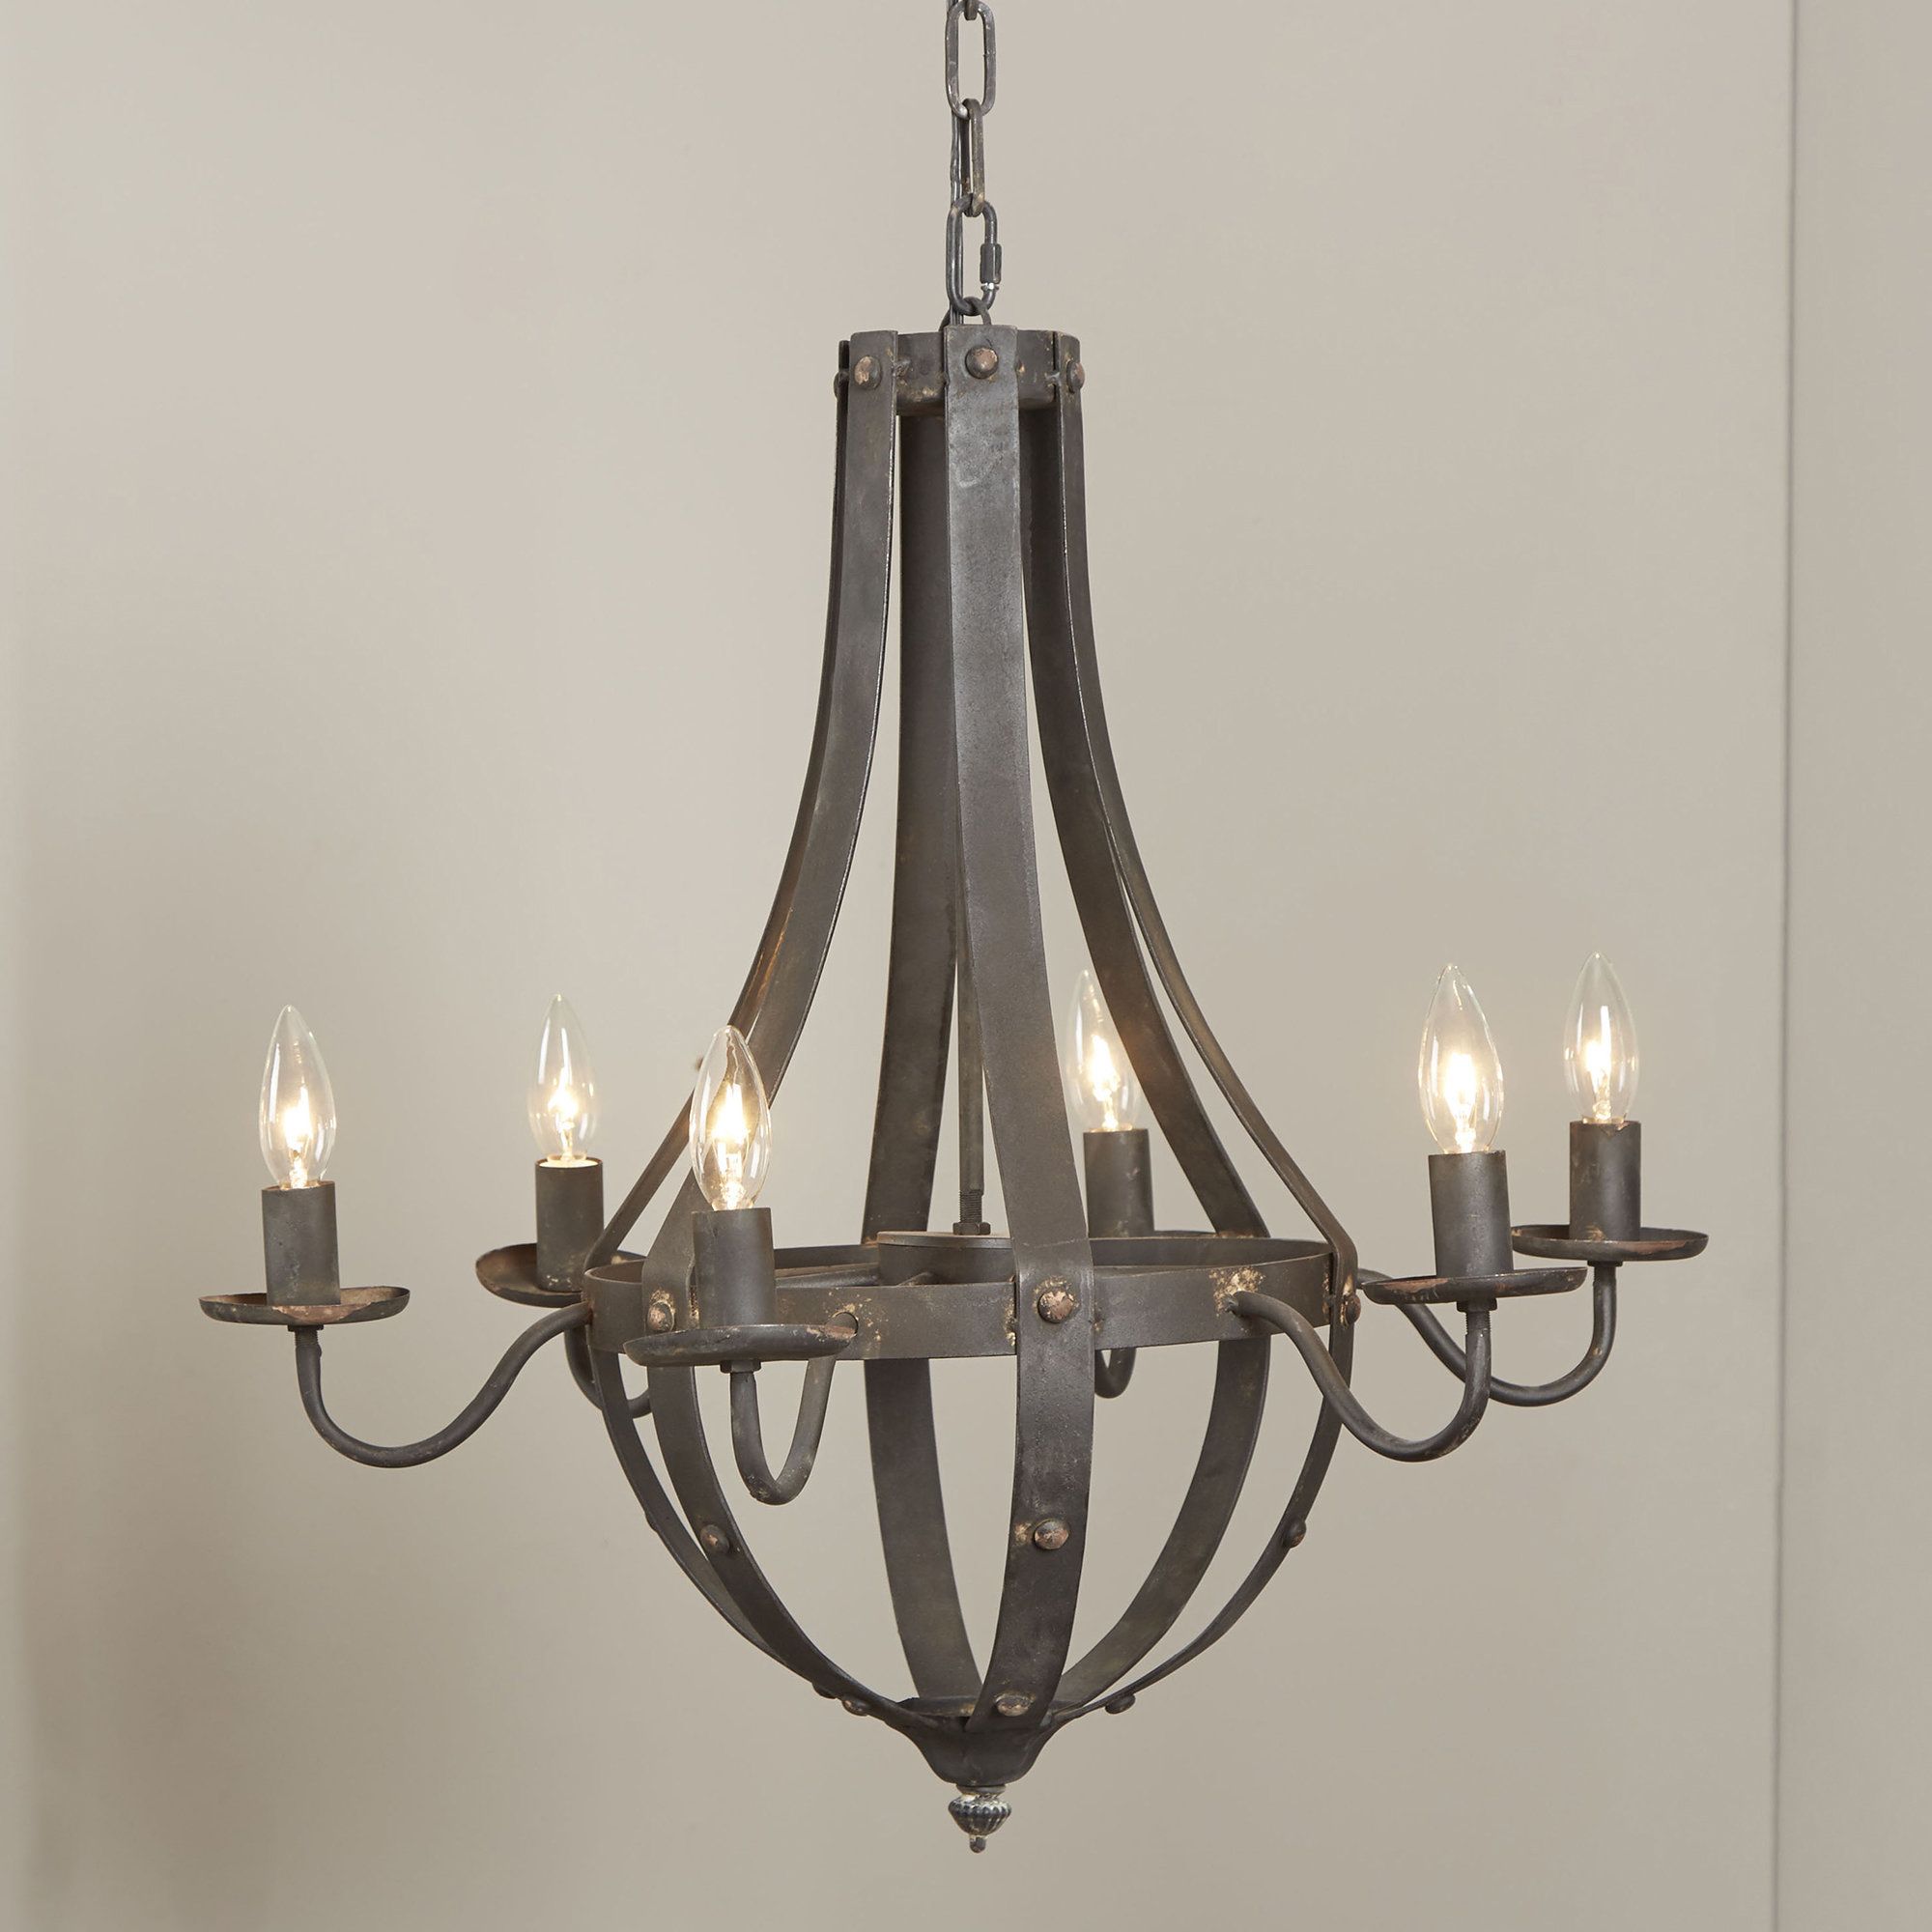 Foulds 6 Light Empire Chandelier With Phifer 6 Light Empire Chandeliers (View 4 of 30)